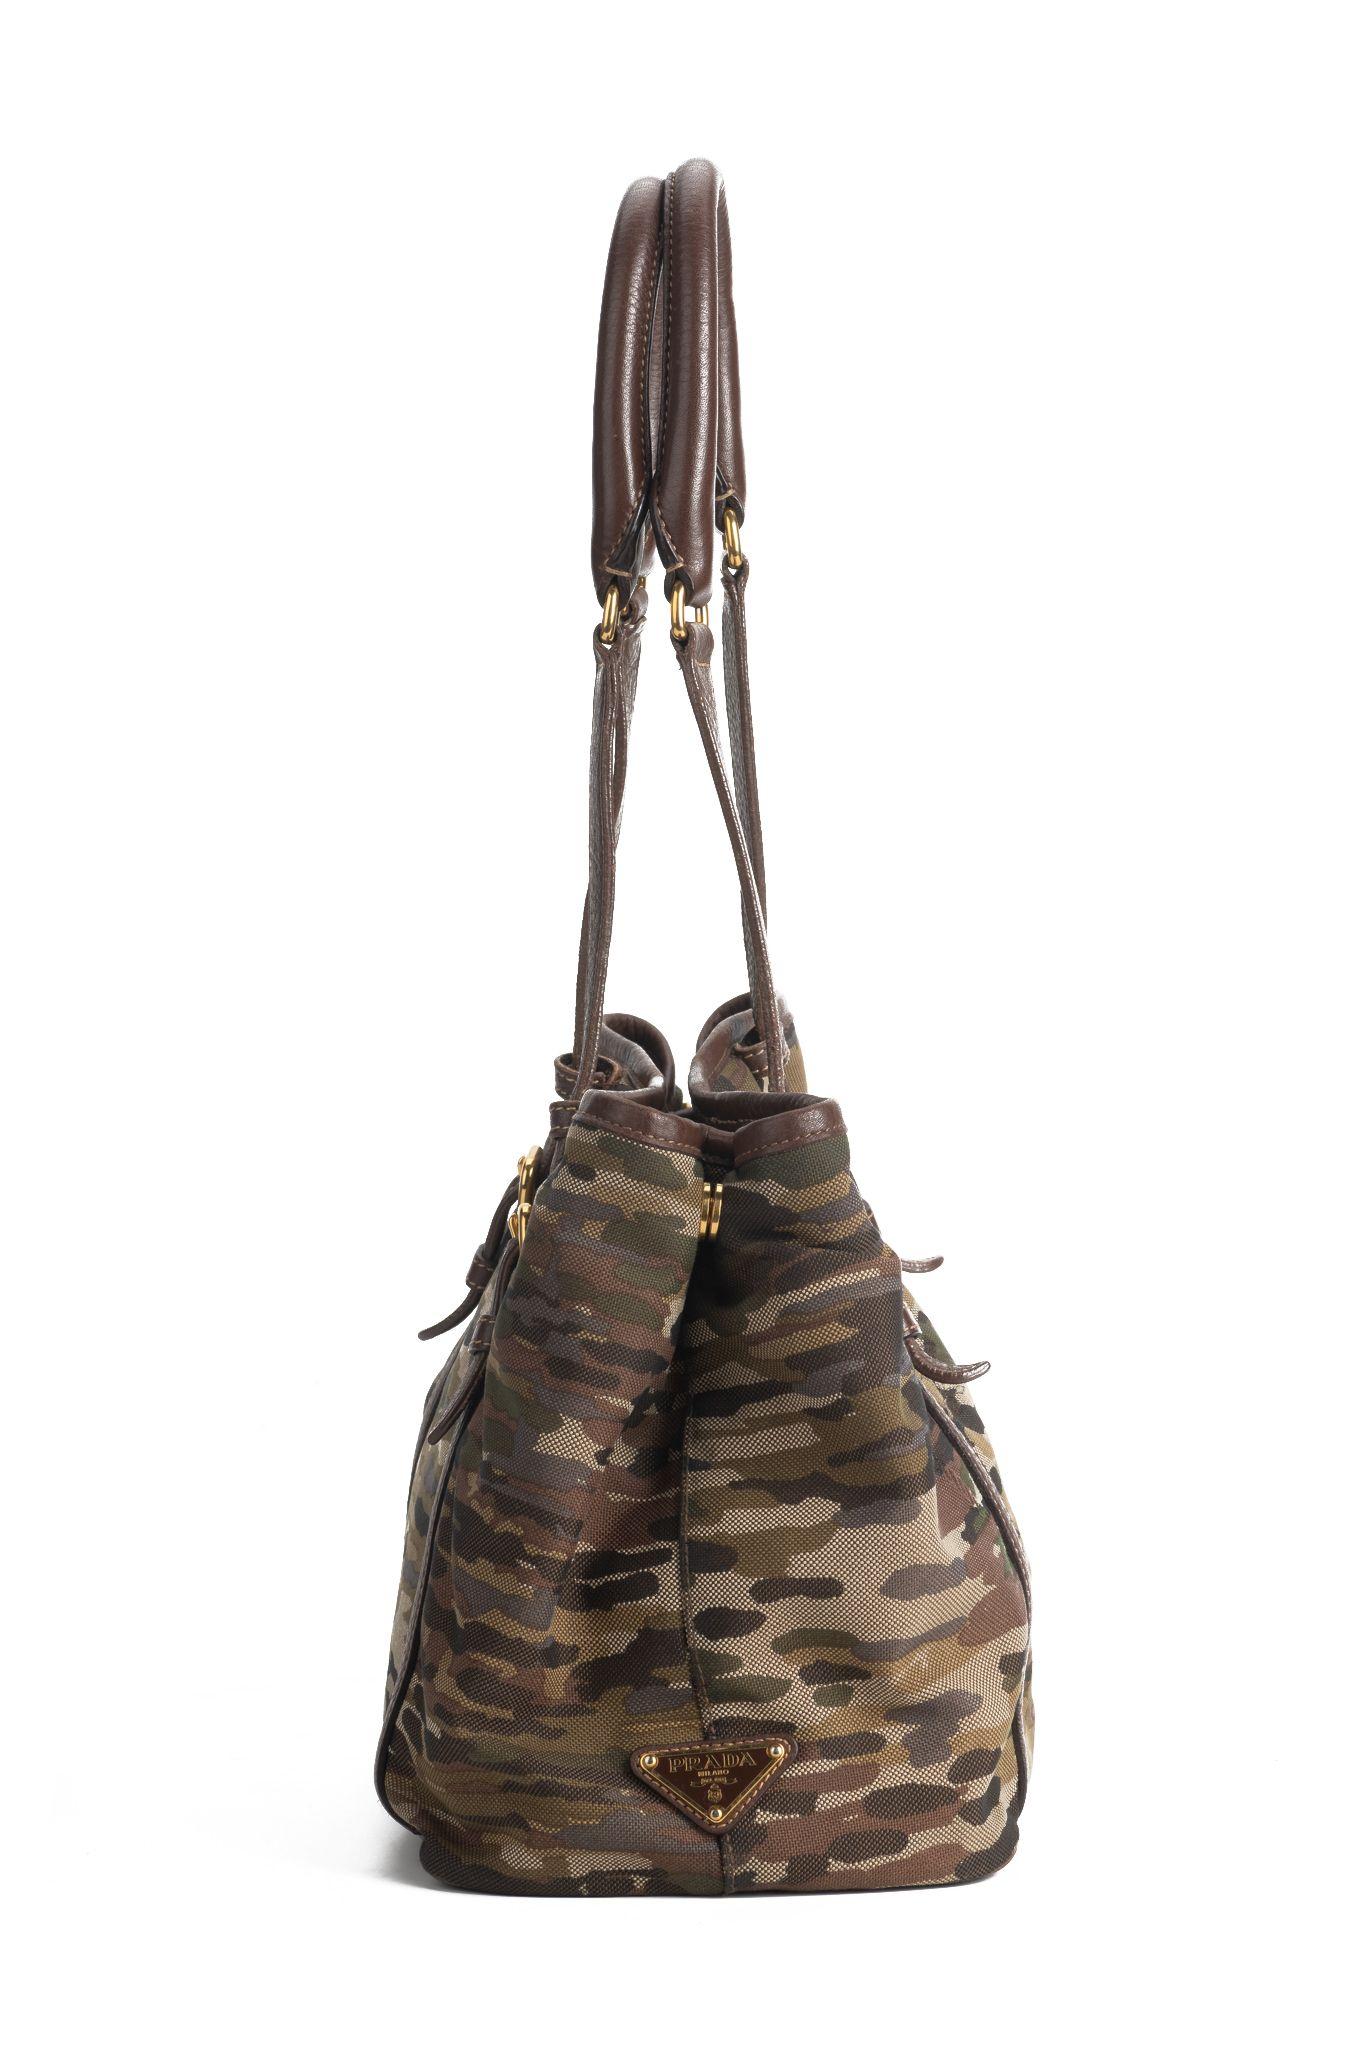 Prada Camouflage 2 Way Tote In Excellent Condition For Sale In West Hollywood, CA